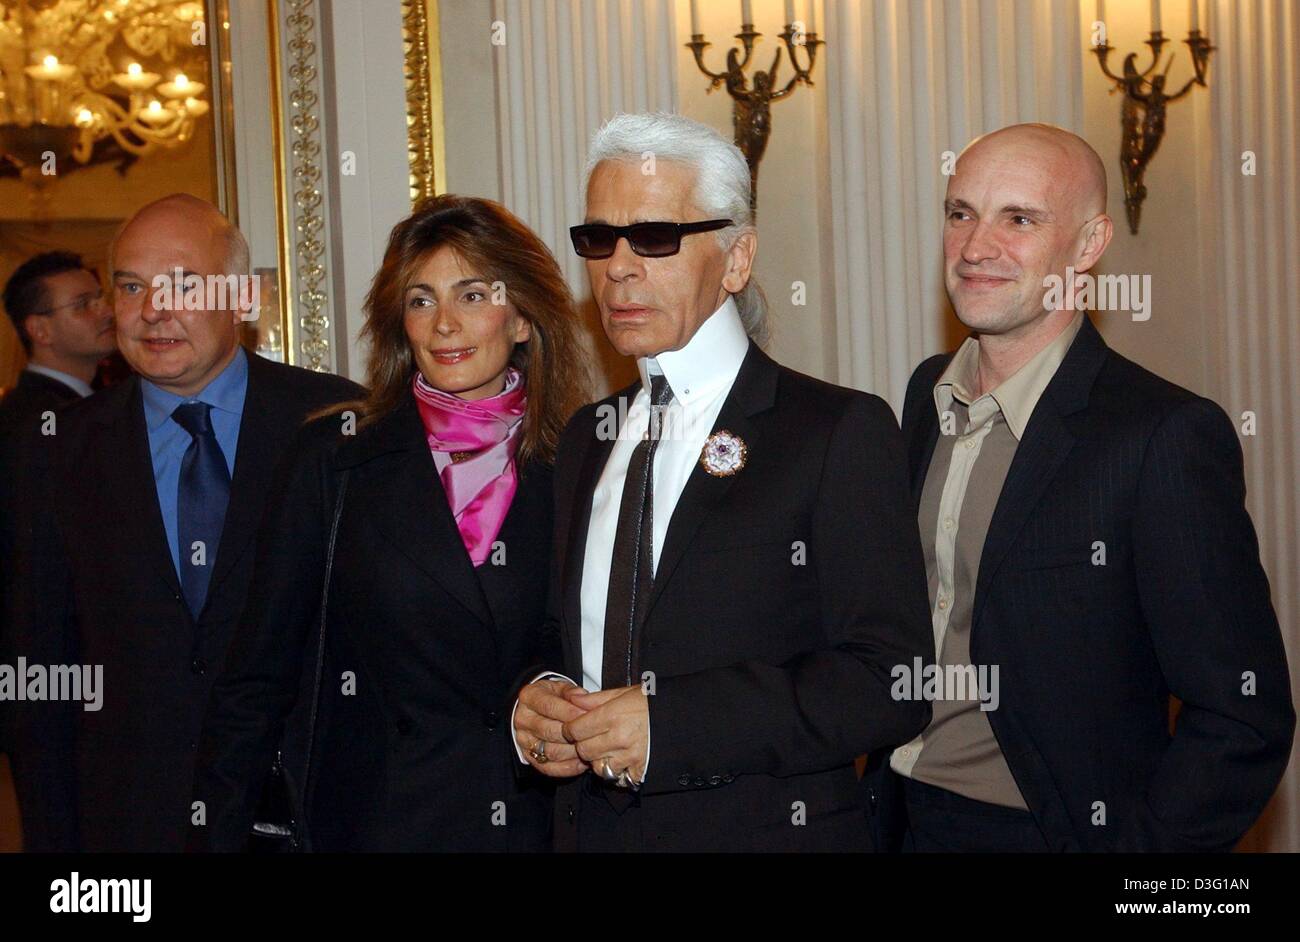 (dpa) - From L: Rolf Sachs, the eldest son of ex-playboy Gunter Sachs, his wife Maryam, fashion designer Karl Lagerfeld and choreographer Jean-Christophe Maillot stand in the National Theatre in Munich, 25 March 2003. At the theatre, the ballet week was opened with a performance of the ballet group 'Les Ballets de Monte Carlo'. Stock Photo